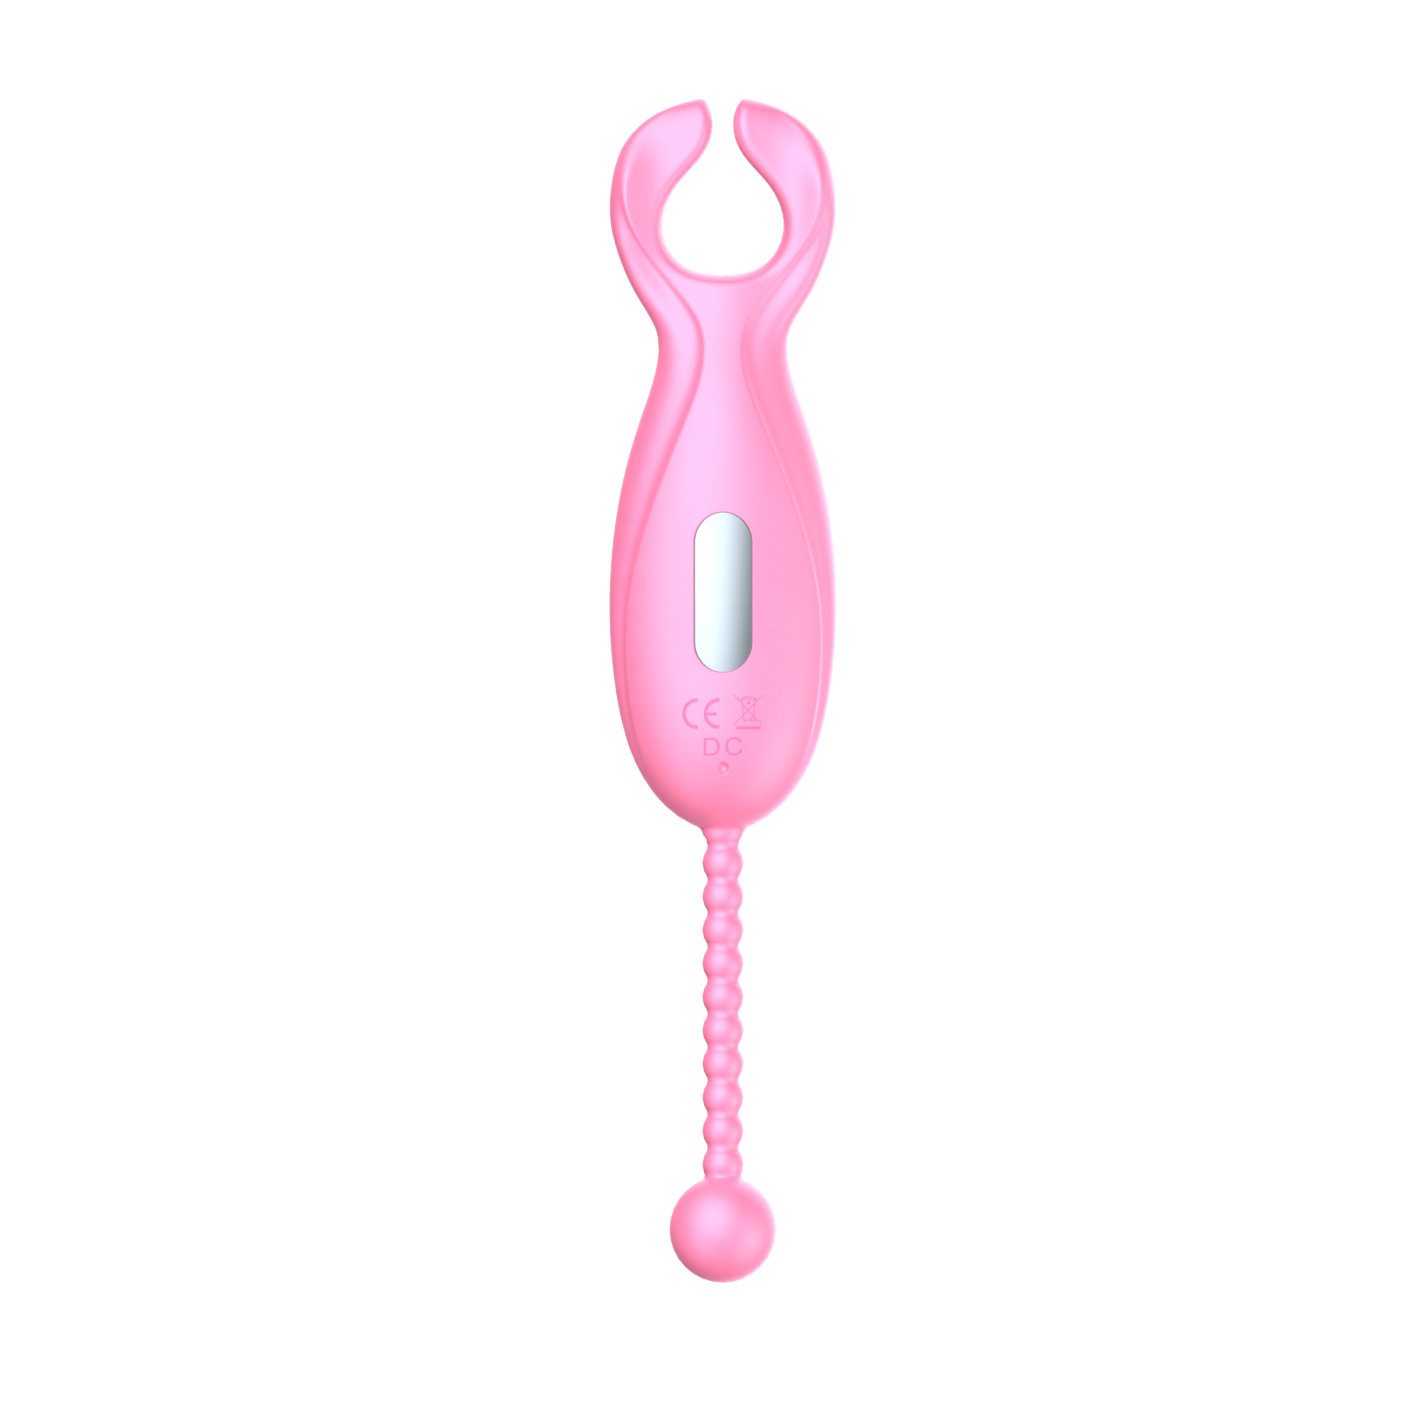 12 Function Rechargeable Silicone Lipstick Vibrator Sex Toy